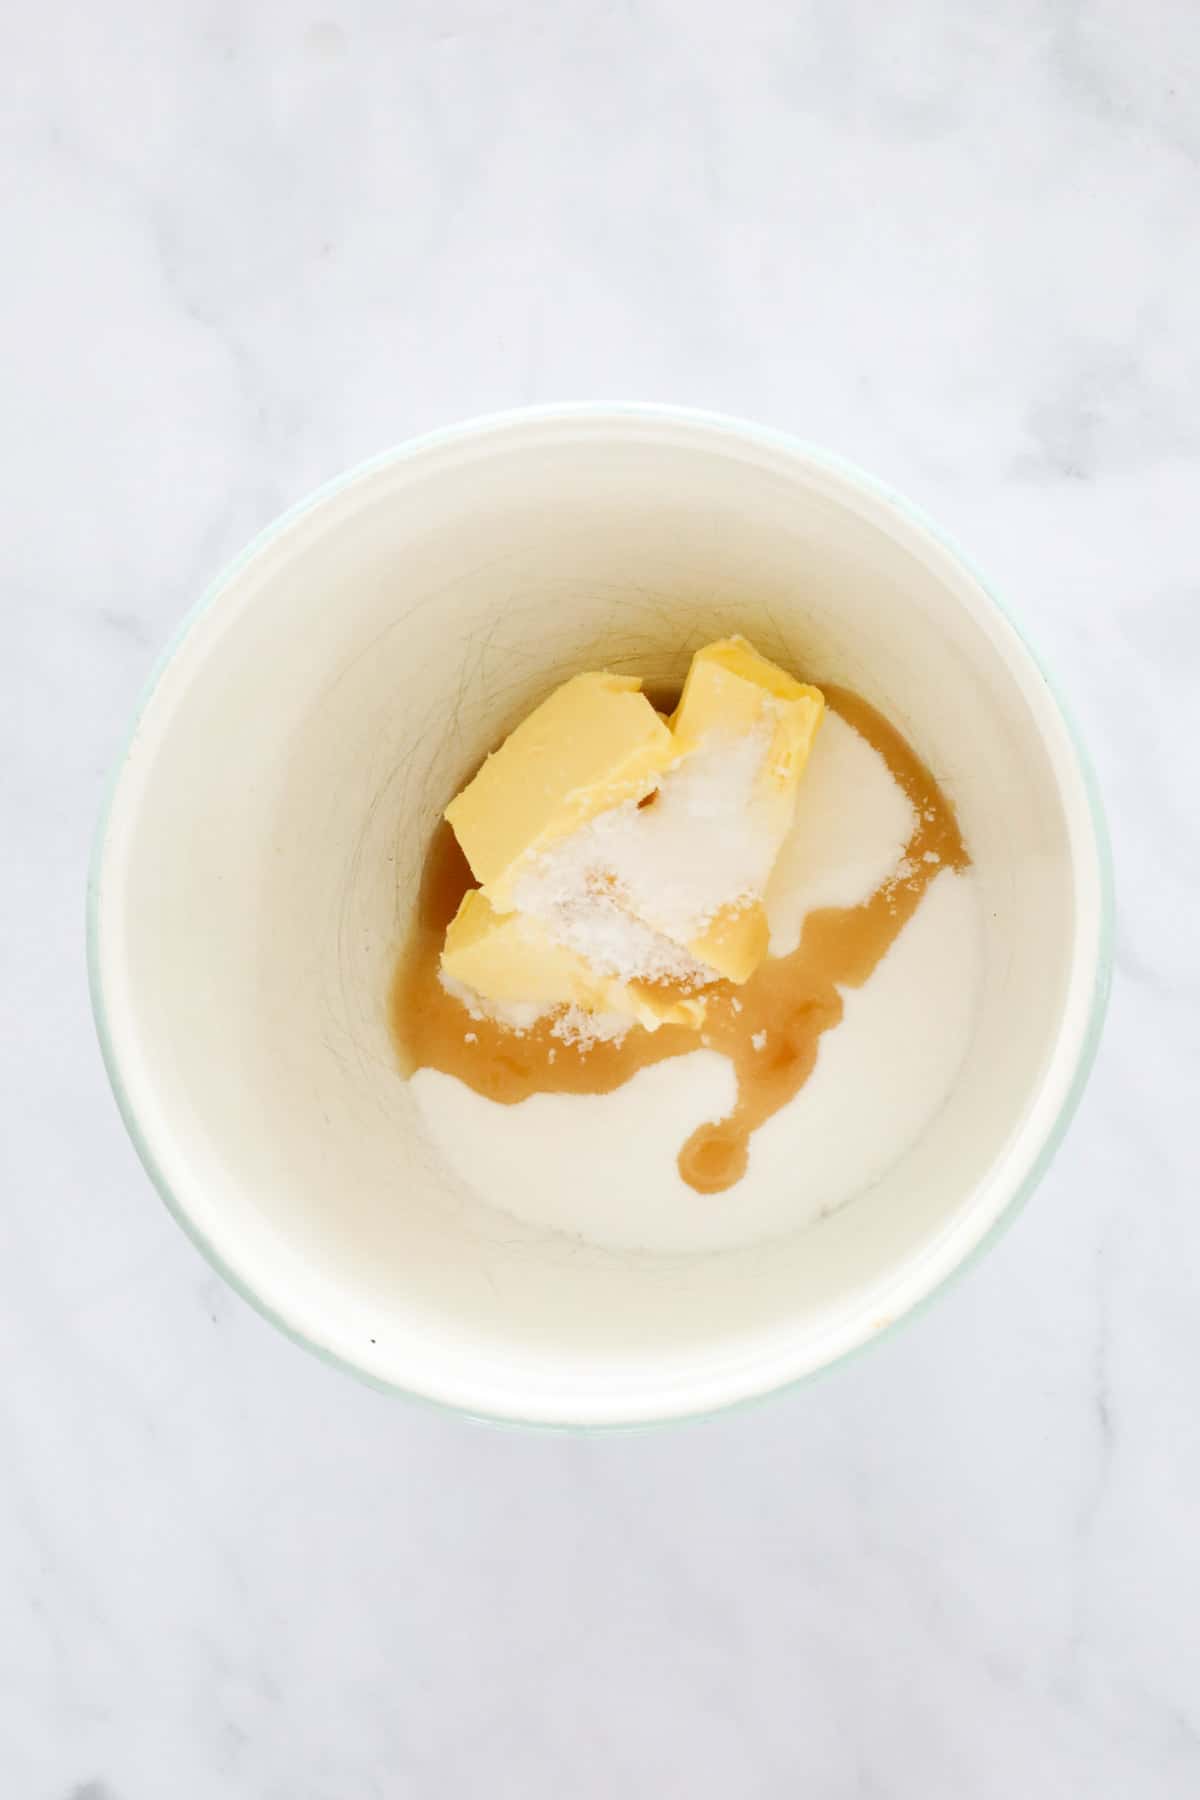 Butter, sugar and vanilla extract in a white mixing bowl.